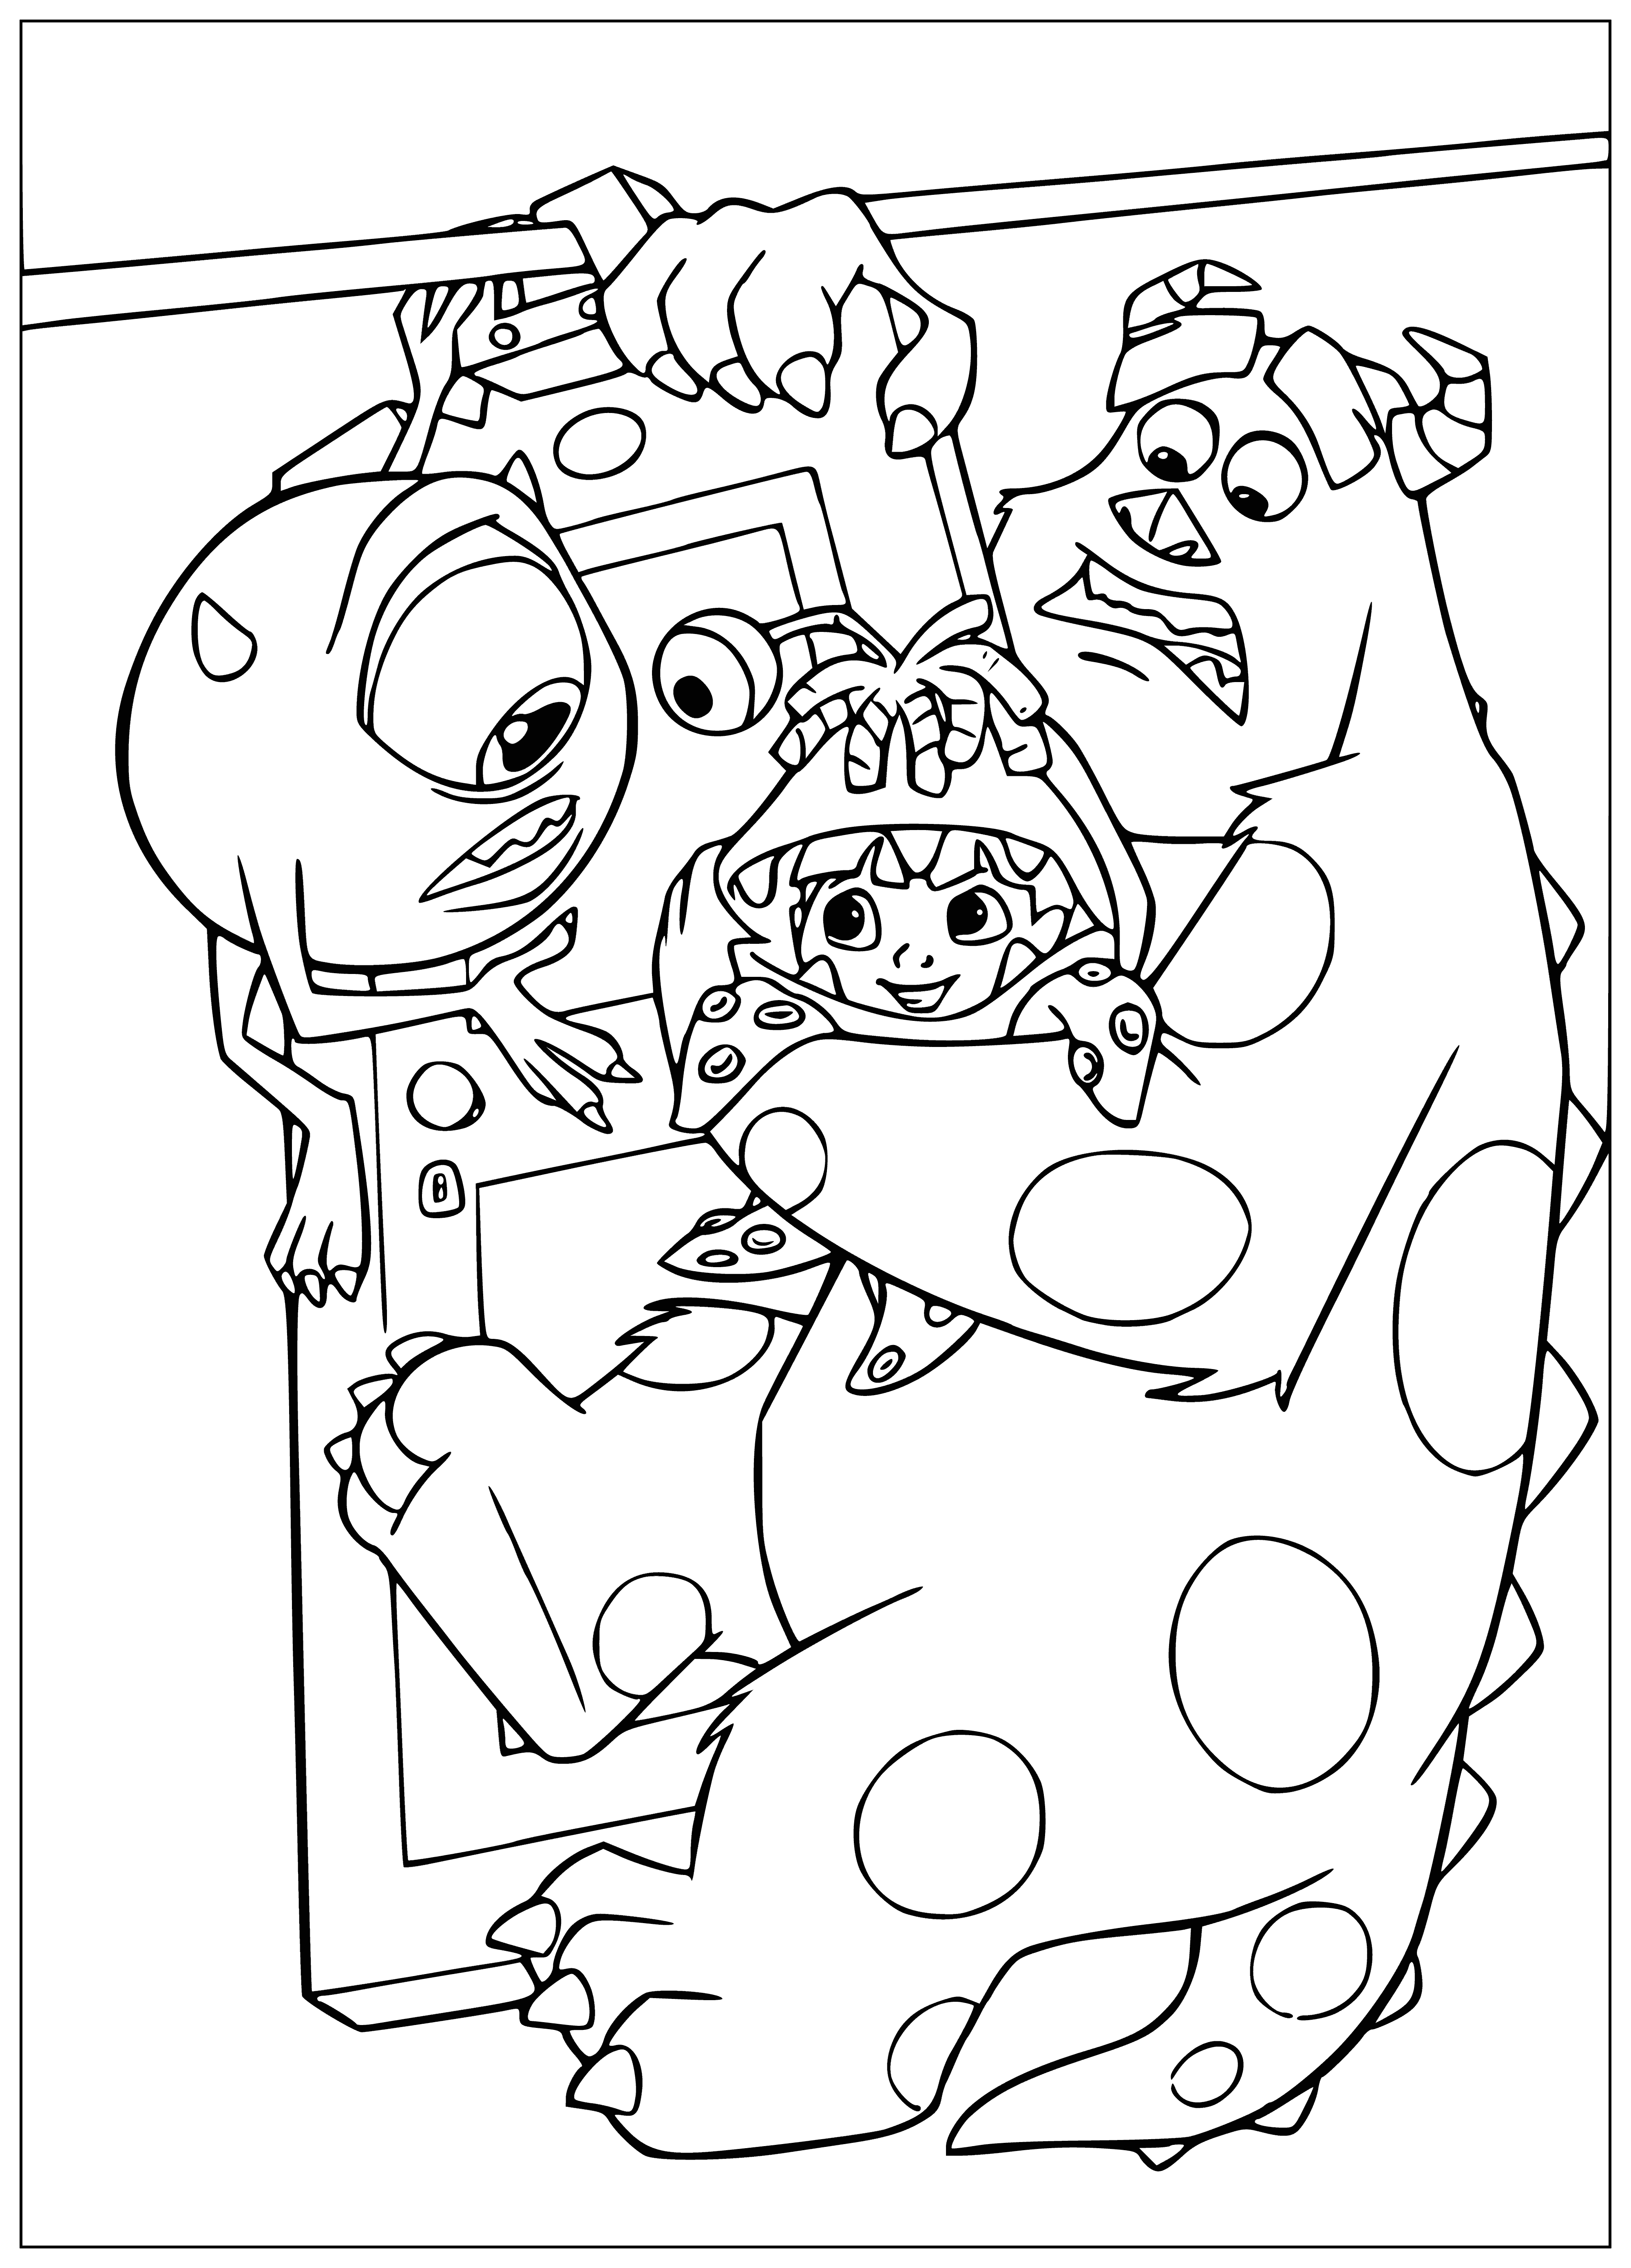 coloring page: A monster holds the door knob of an open door, with two eyes and a mouth.